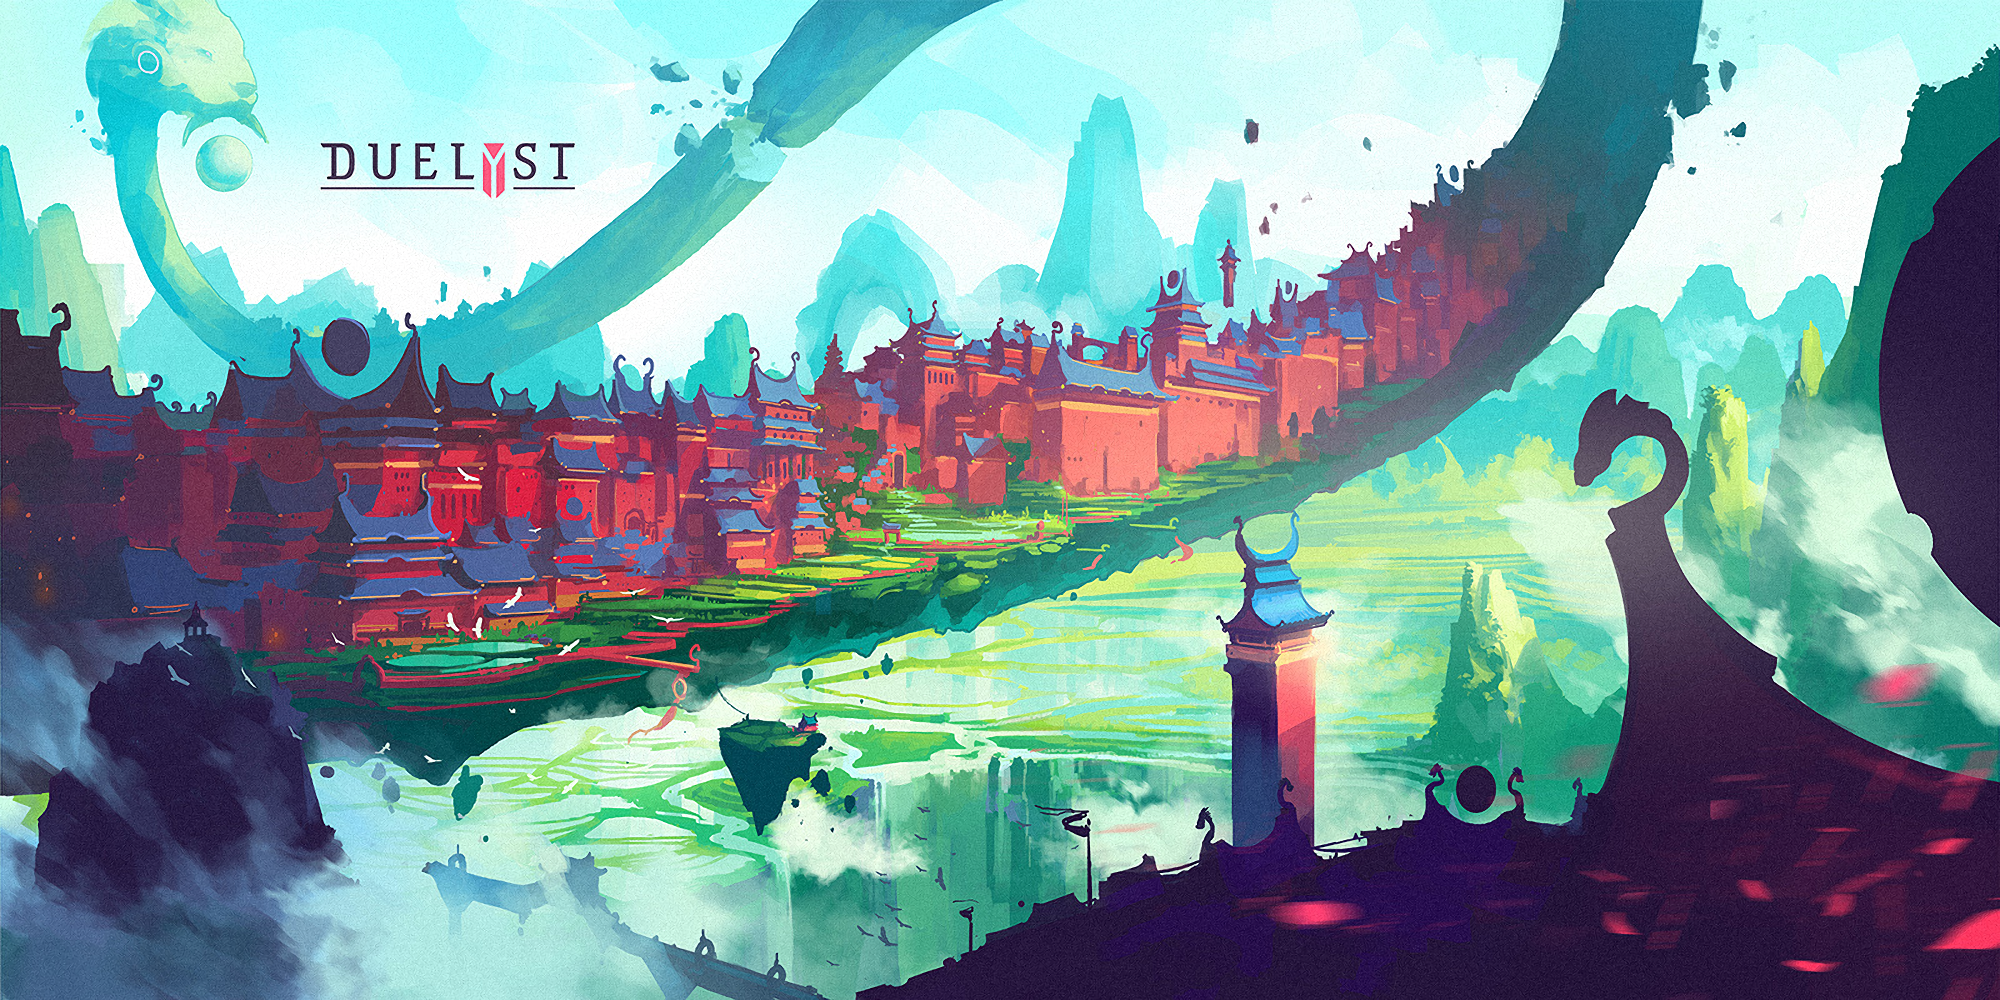 Video Game Duelyst 2000x1000